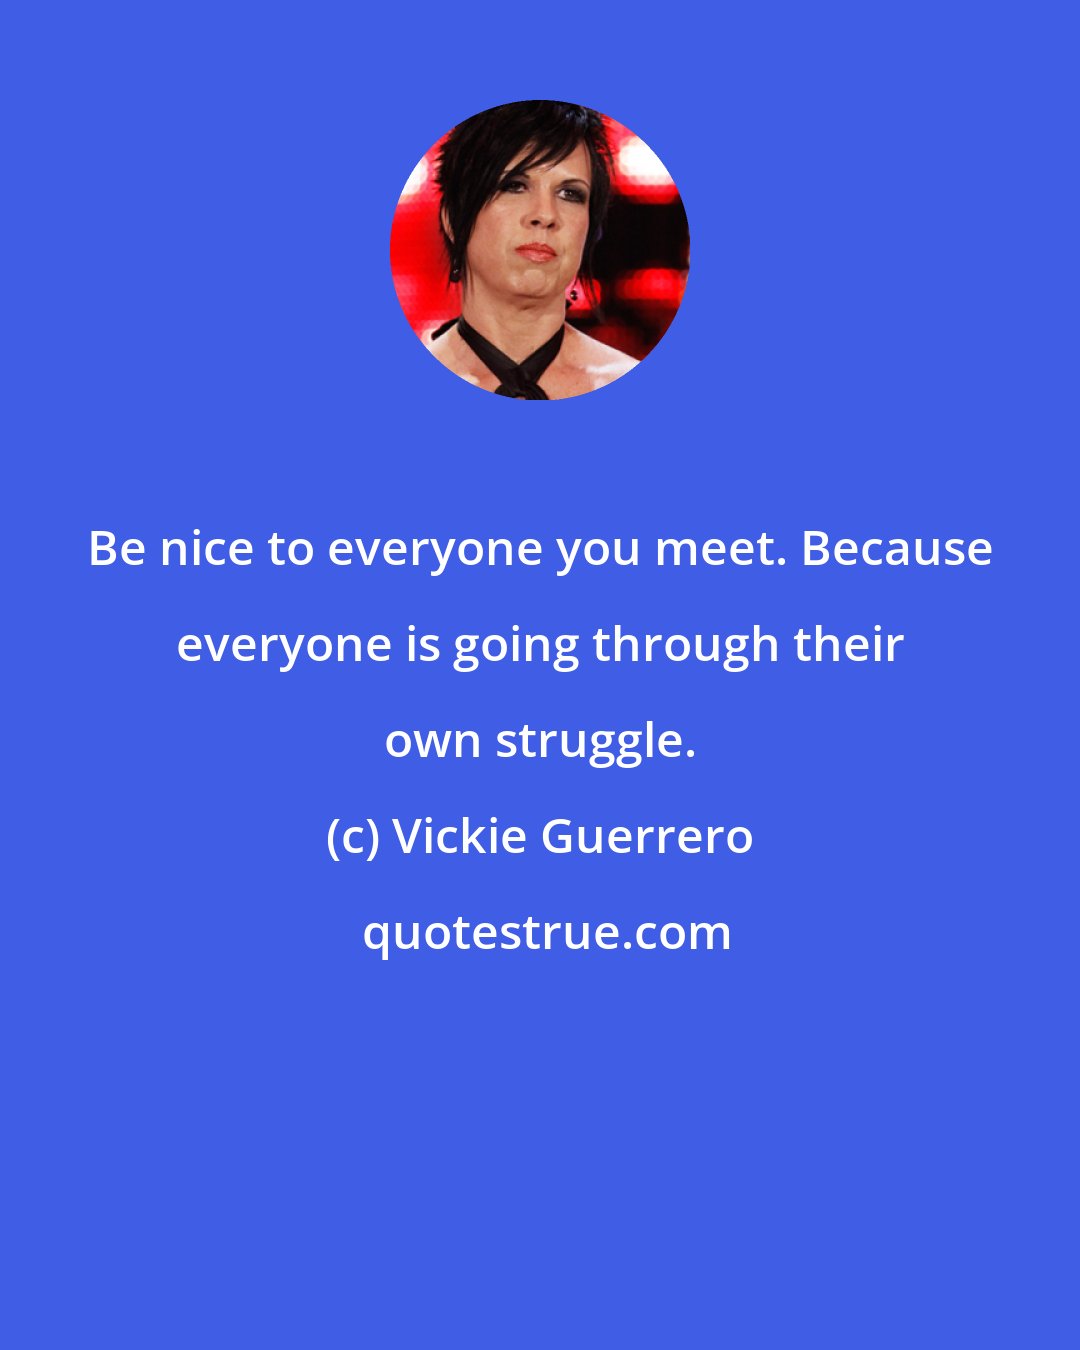 Vickie Guerrero: Be nice to everyone you meet. Because everyone is going through their own struggle.